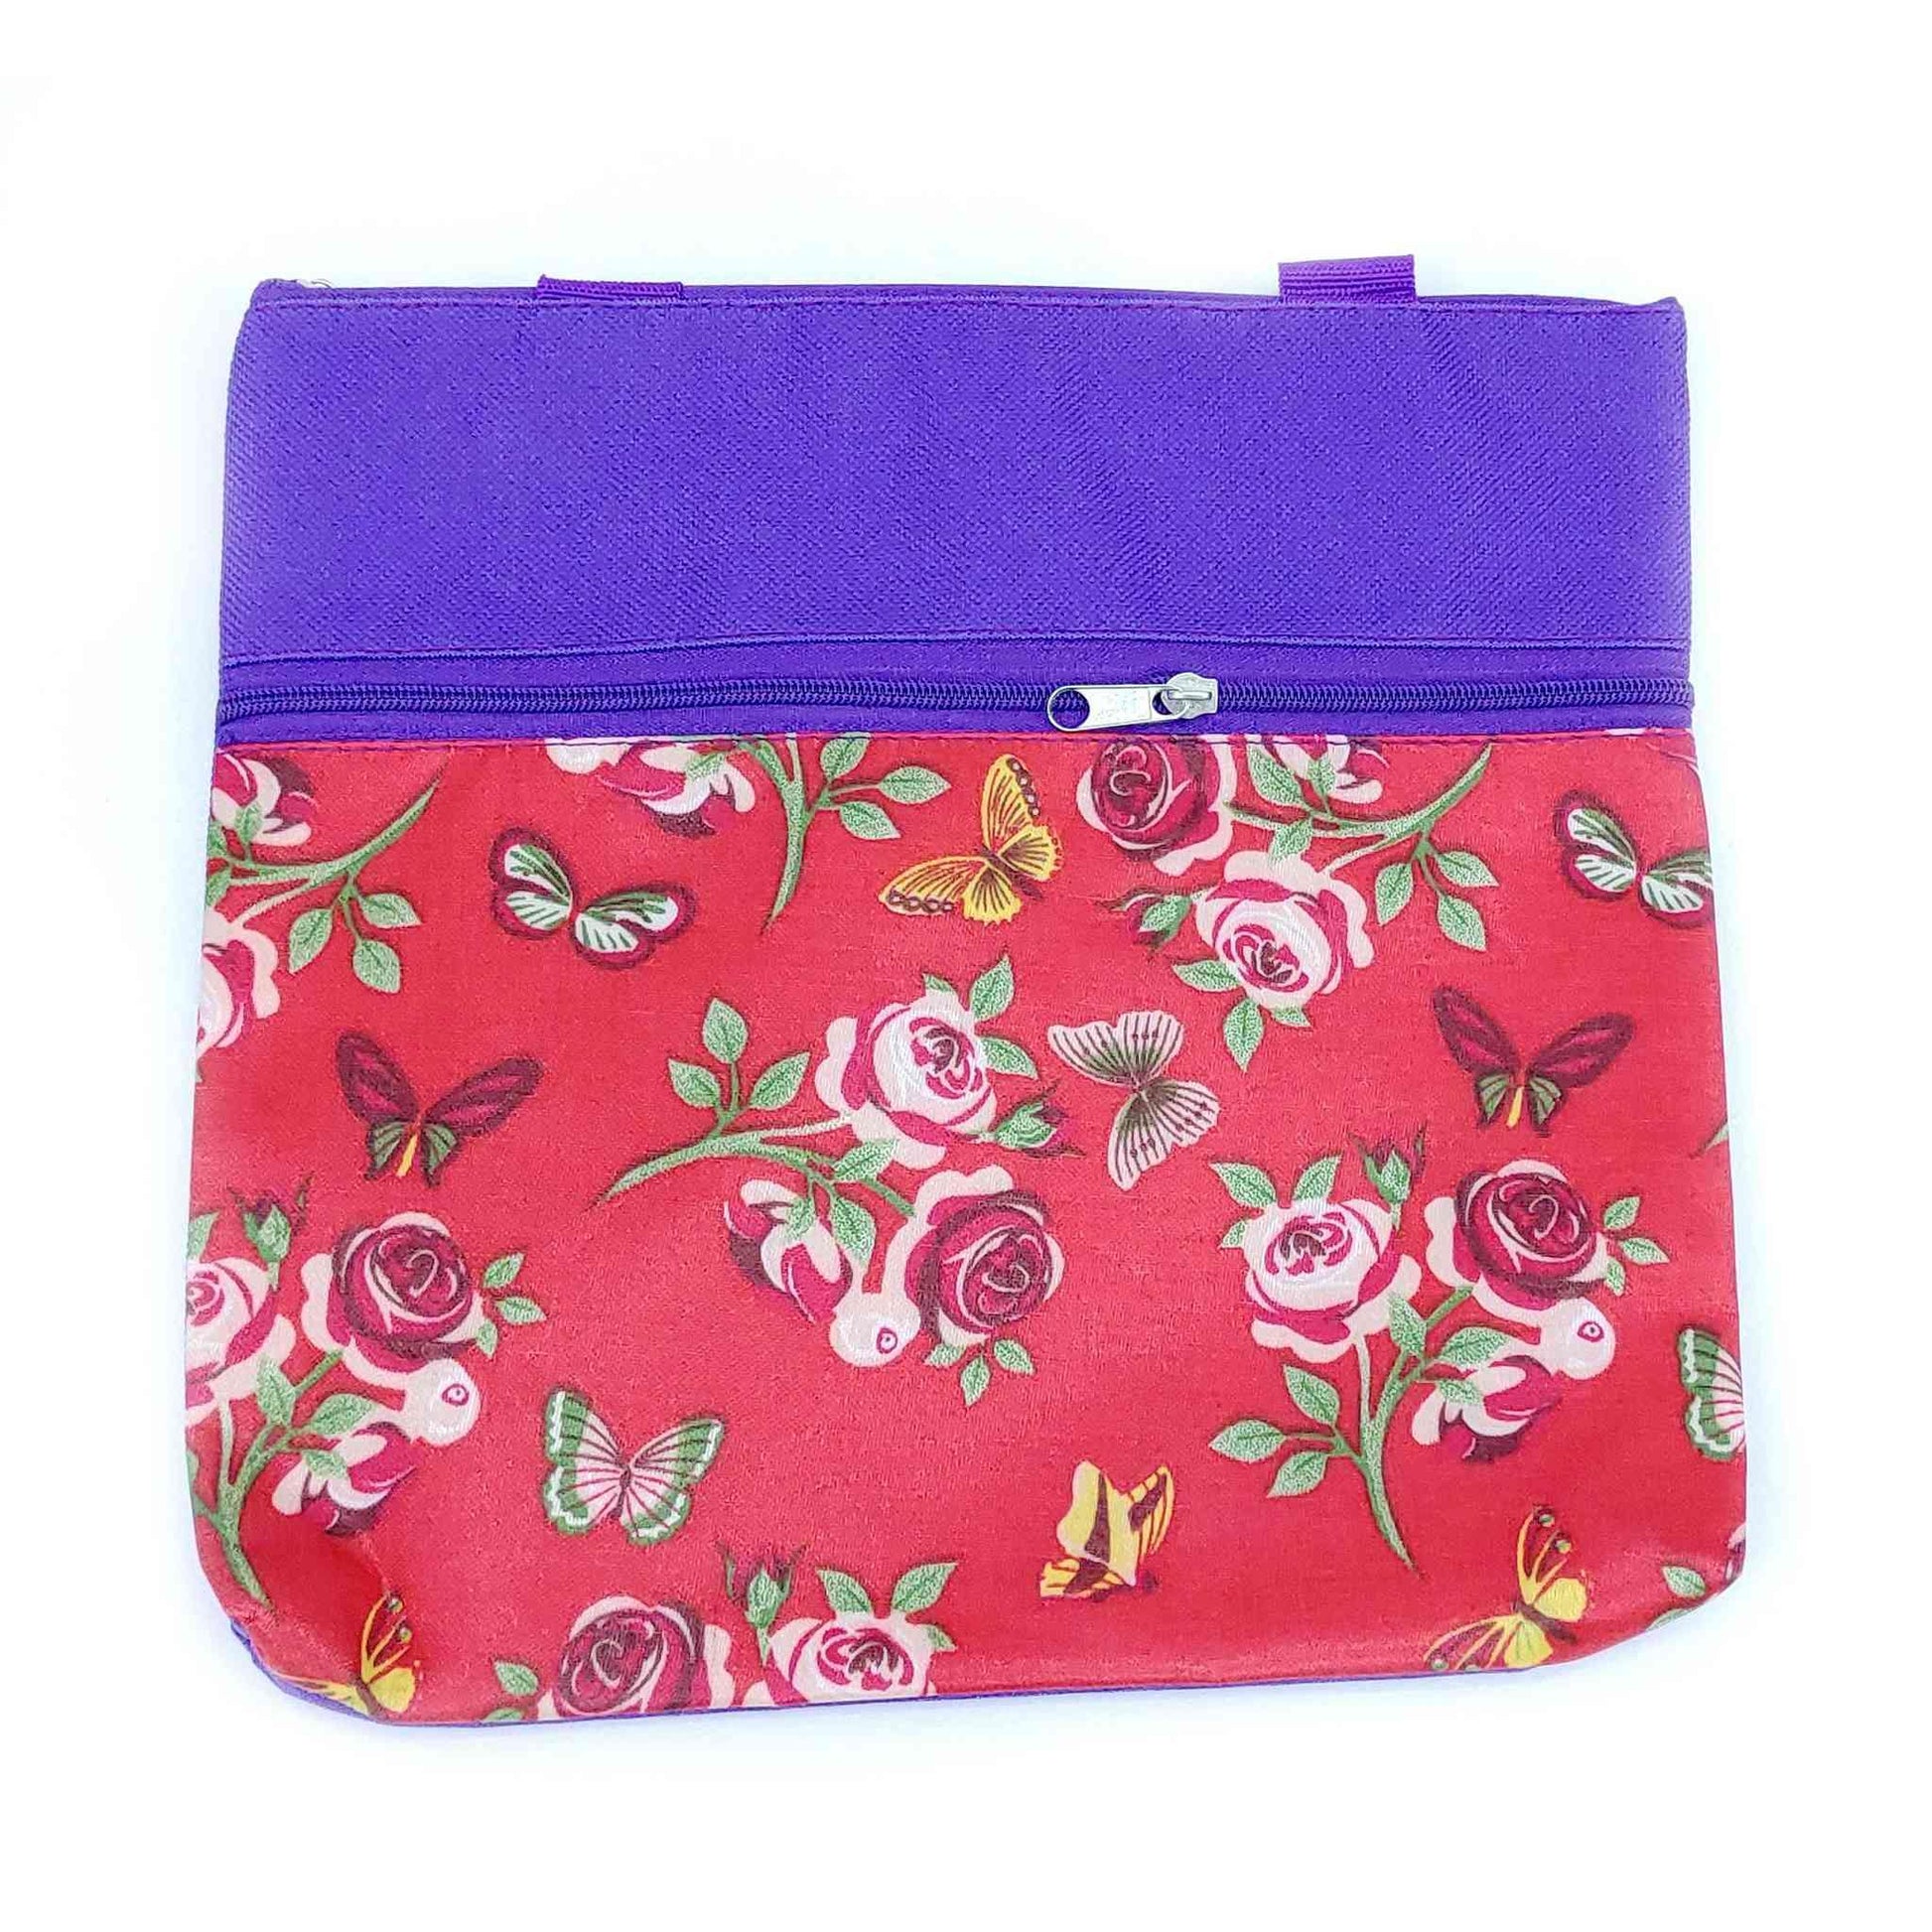 Imported Durable Canvas Printed multi purpose utility Medium size Bag with handles for all occasions for the girls and ladies, Design 3, Purple - Indian Petals